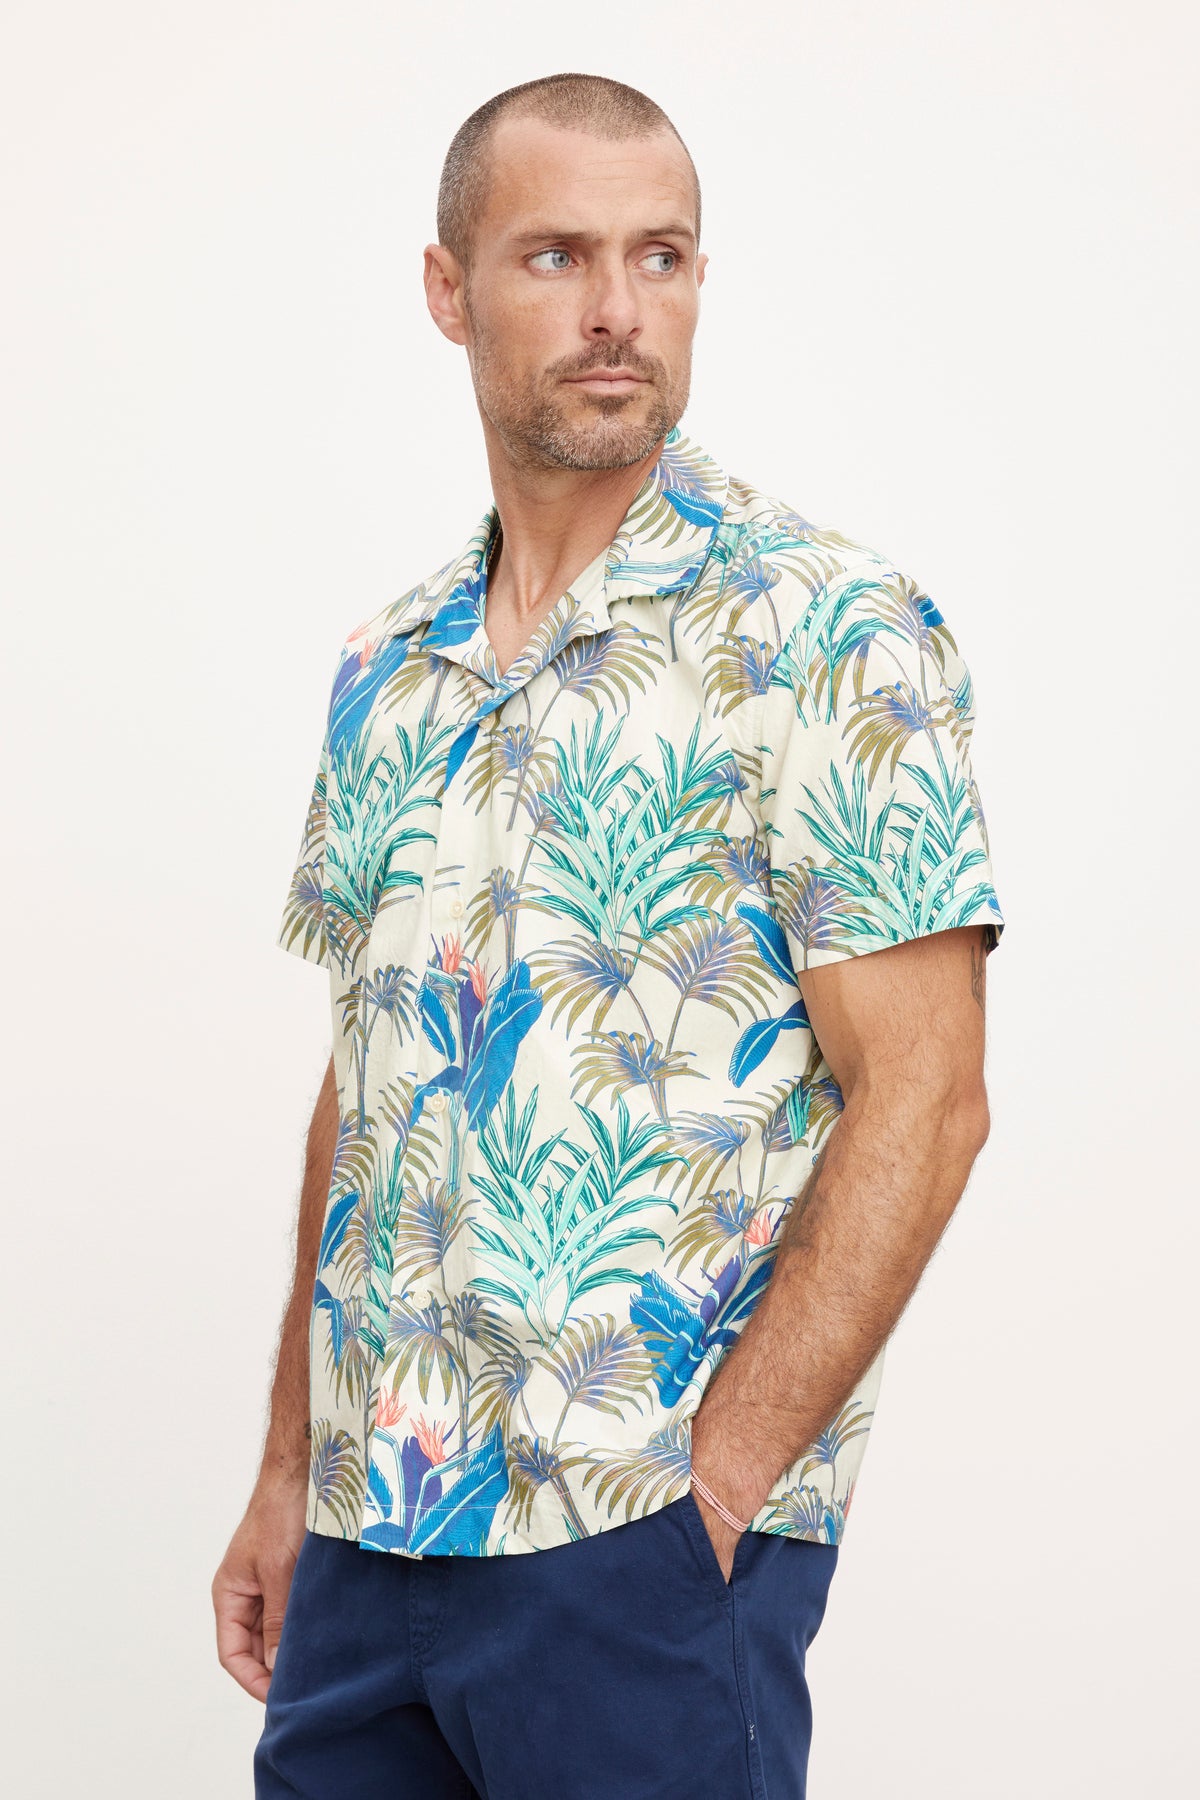   A man in a casual Iggy button-up shirt from Velvet by Graham & Spencer stands facing left, looking ahead with a neutral expression. 